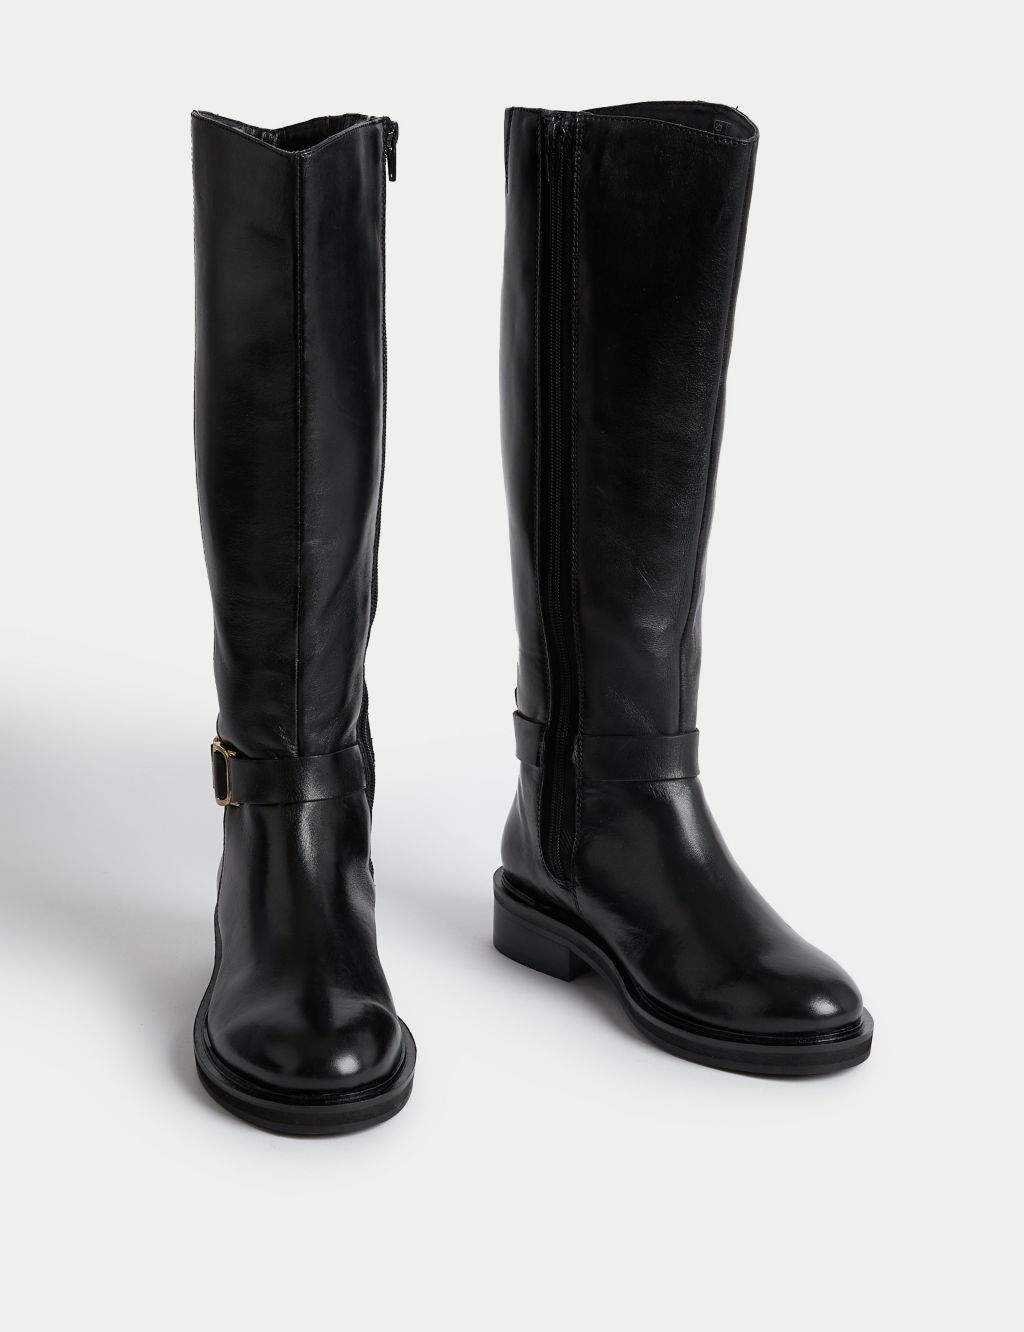 Leather Flat Riding Boots image 2